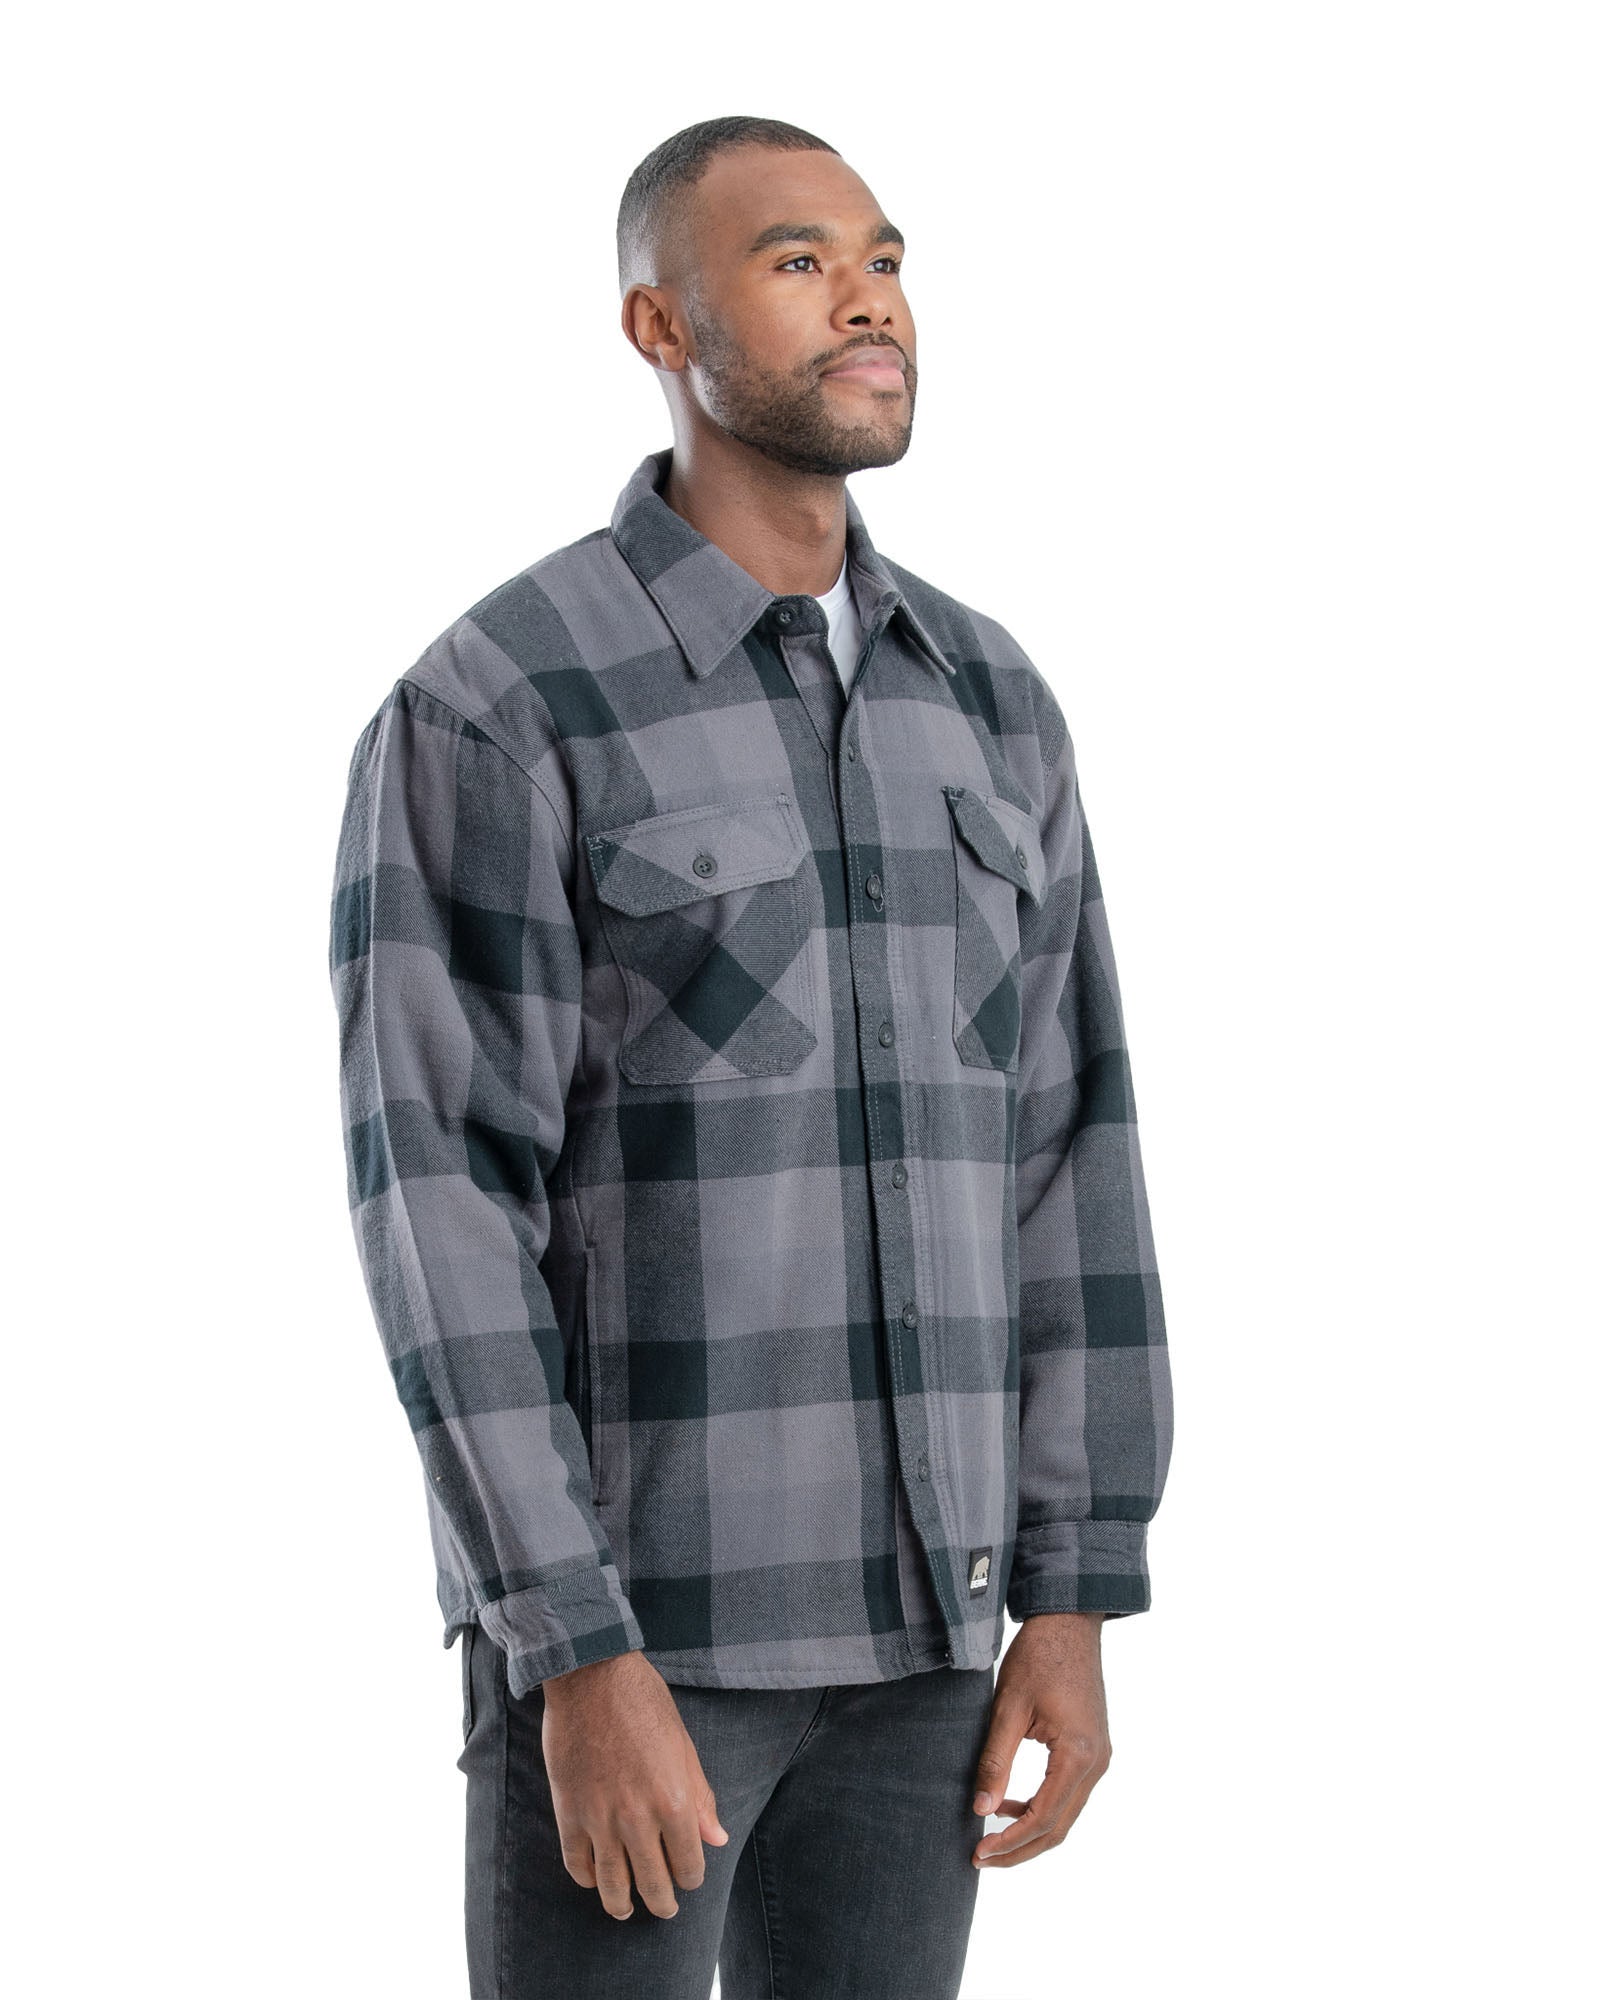 Wrangler Authentics Men's Long Sleeve Quilted Lined Flannel Shirt Jacket  with Hood | Lined flannel shirt, Mens outerwear fashion, Shirt jacket men